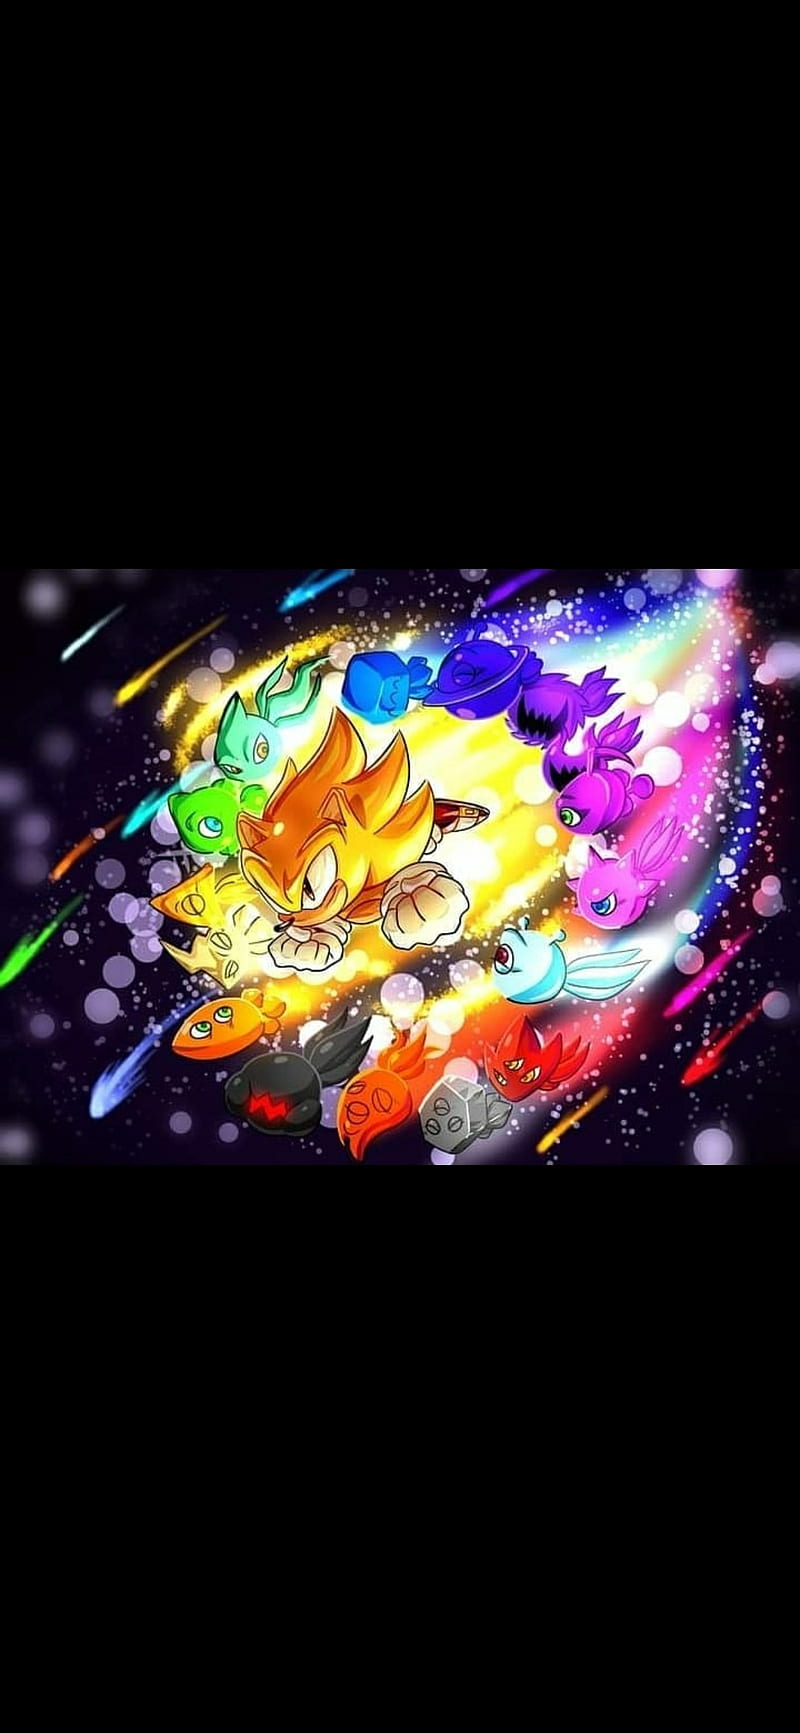 Sonic Colors Wallpaper by 9029561 on DeviantArt